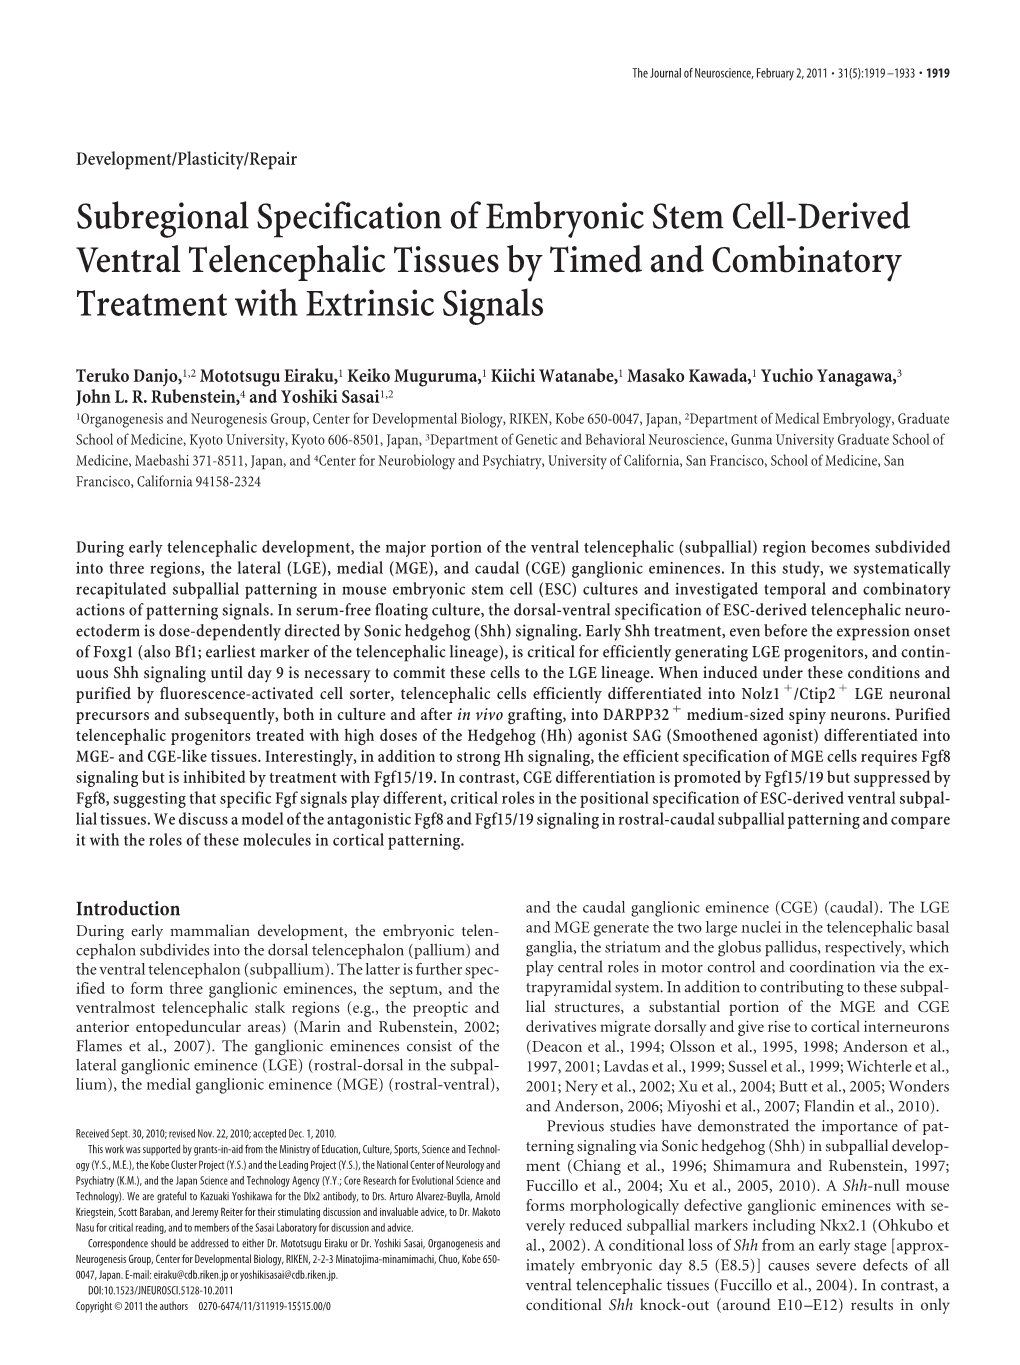 Subregional Specification of Embryonic Stem Cell-Derived Ventral Telencephalic Tissues by Timed and Combinatory Treatment with Extrinsic Signals